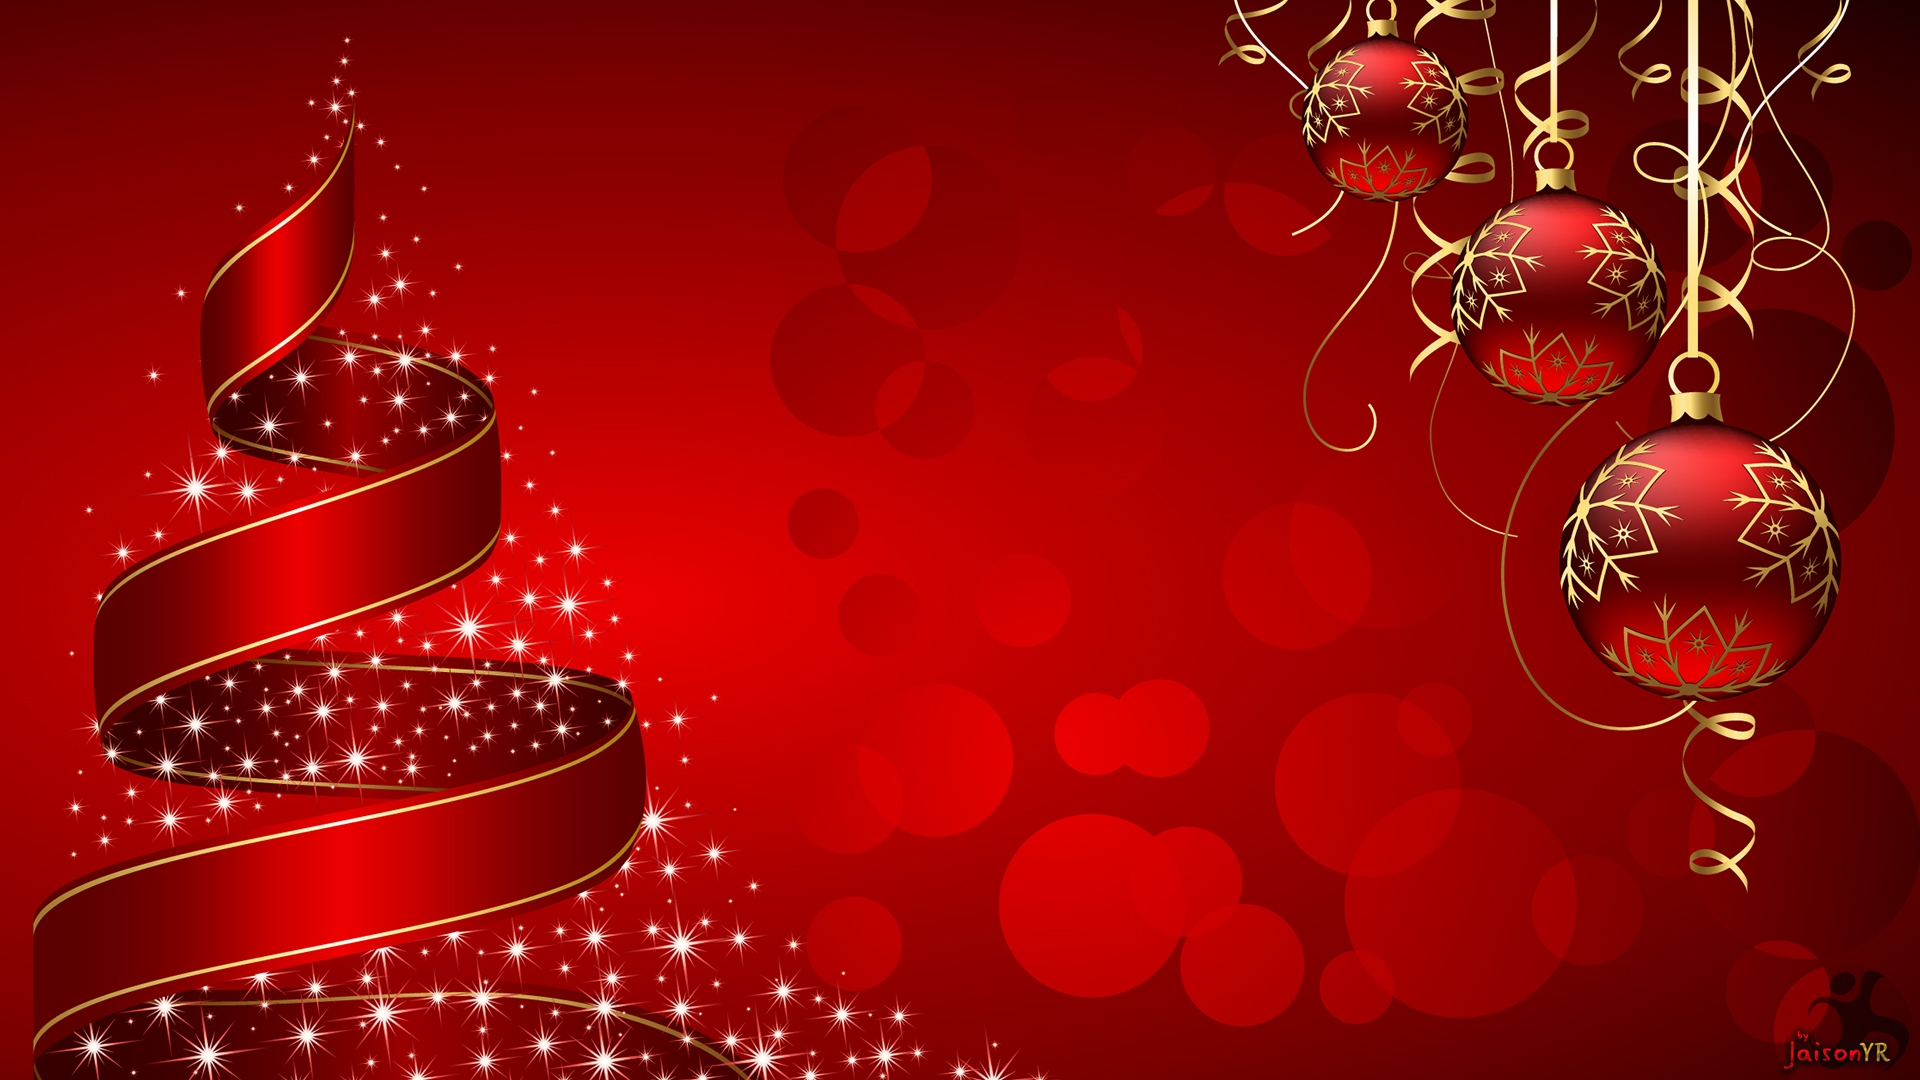 Christmas And New Year Background Hd - HD Wallpaper 